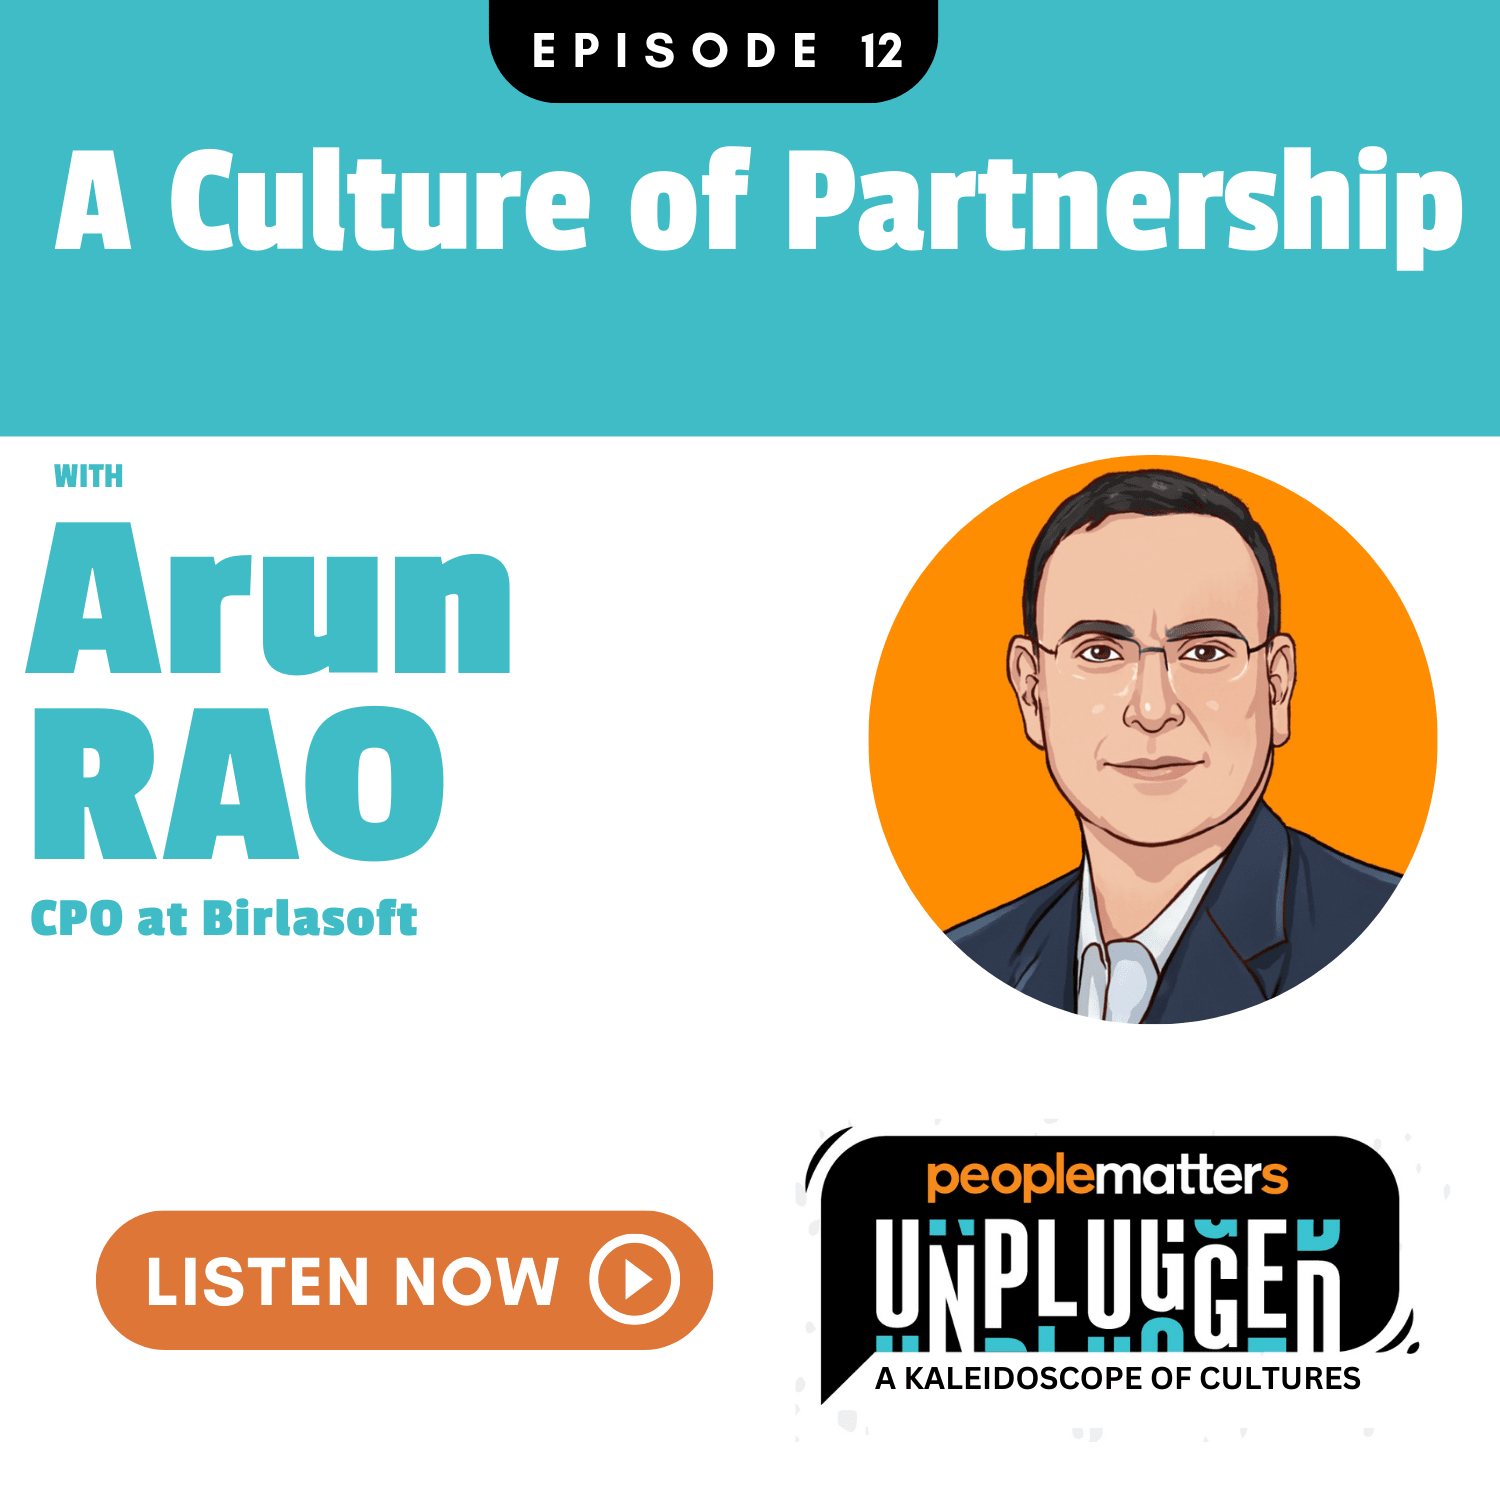 EP 12: A Culture of Partnership